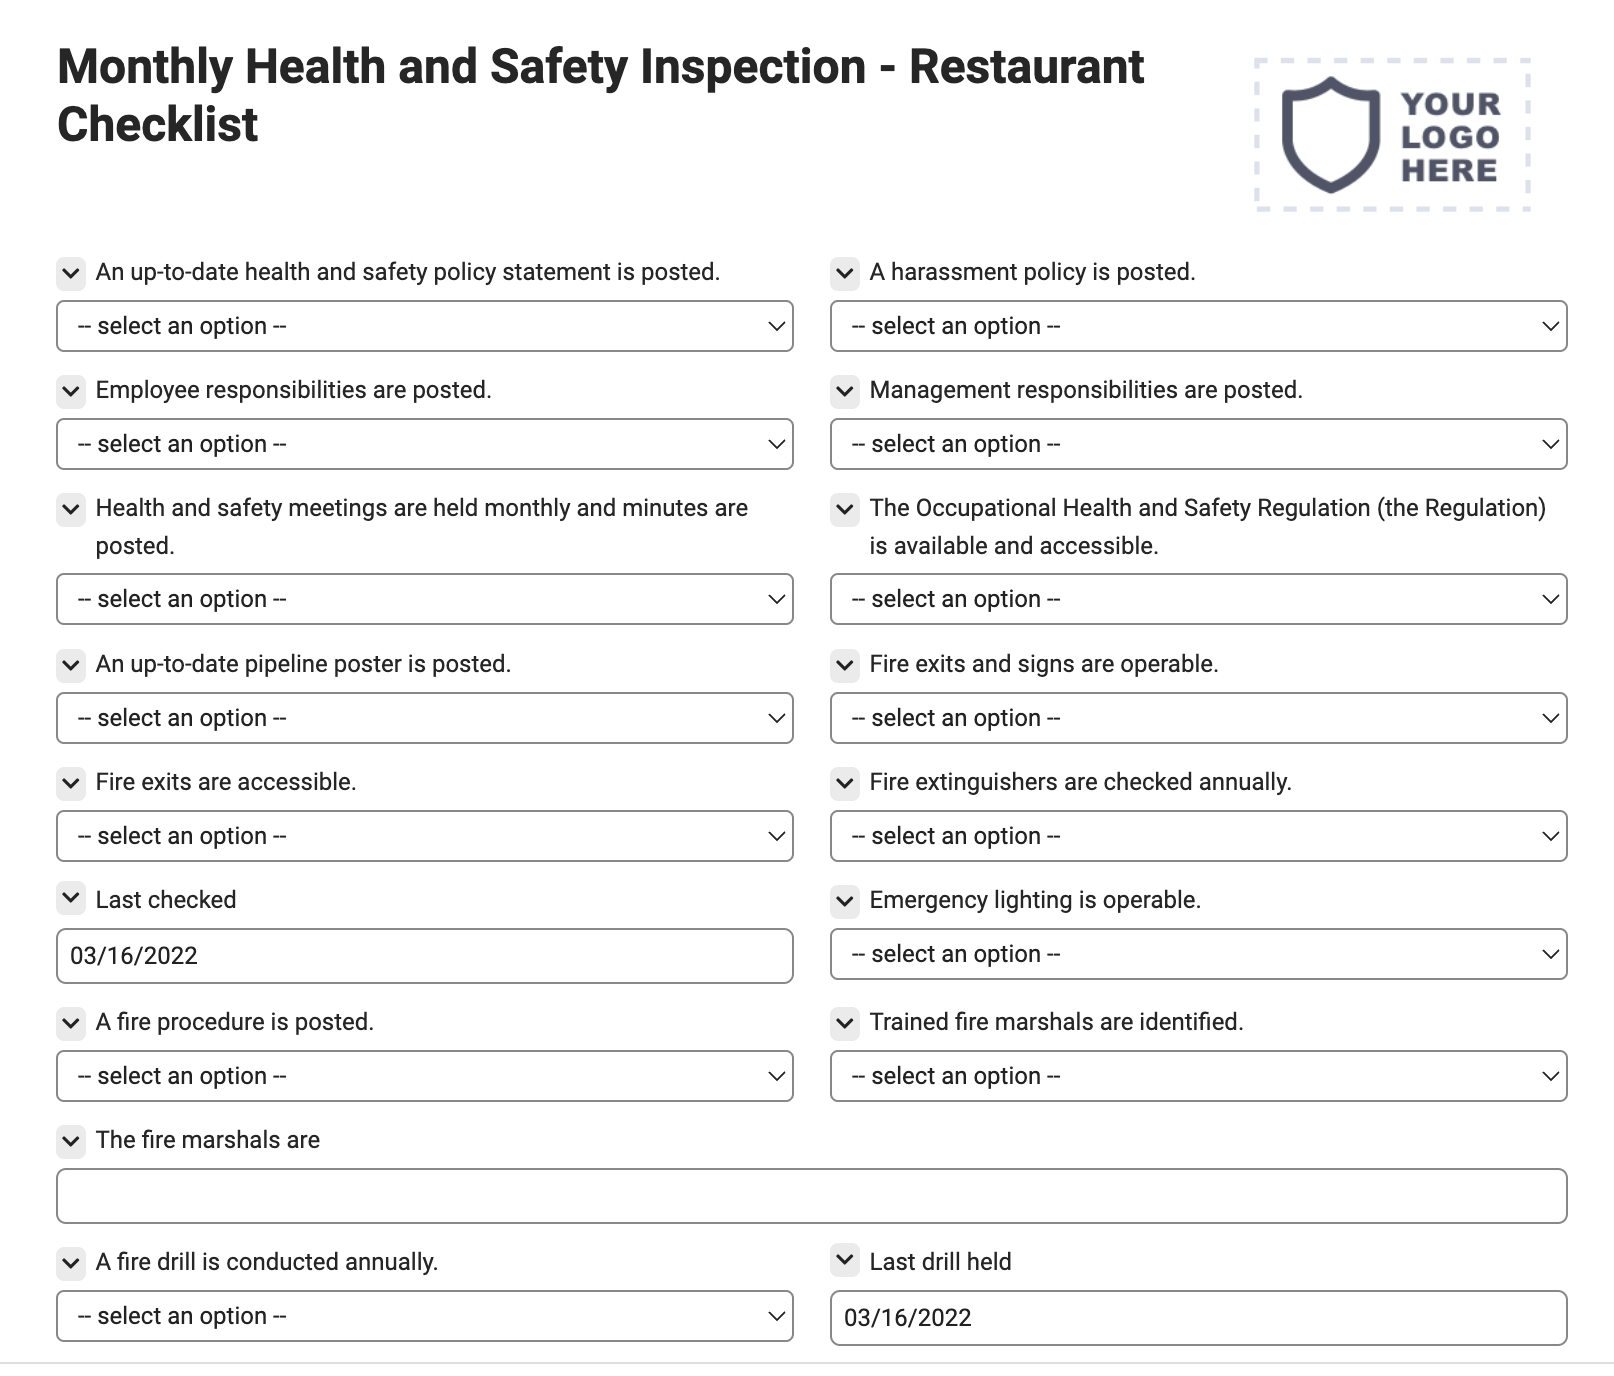 Monthly Health and Safety Inspection - Restaurant Checklist